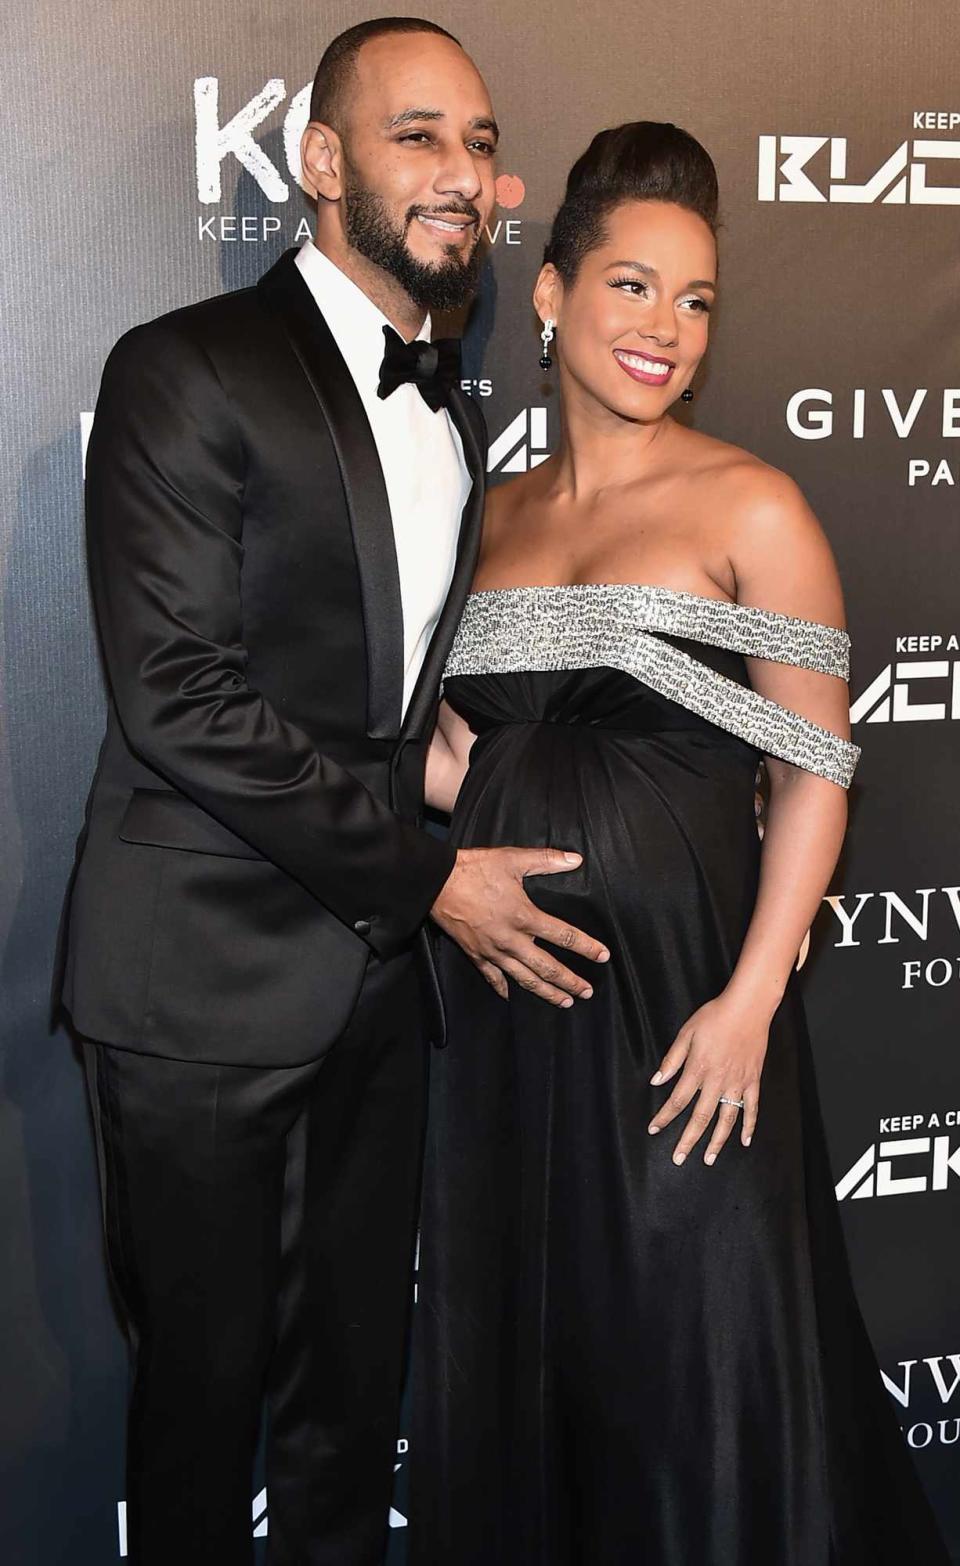 Swizz Beats (L) and Alicia Keys attends the 9th annual Keep A Child Alive Black Ball at Hammerstein Ballroom on October 30, 2014 in New York City